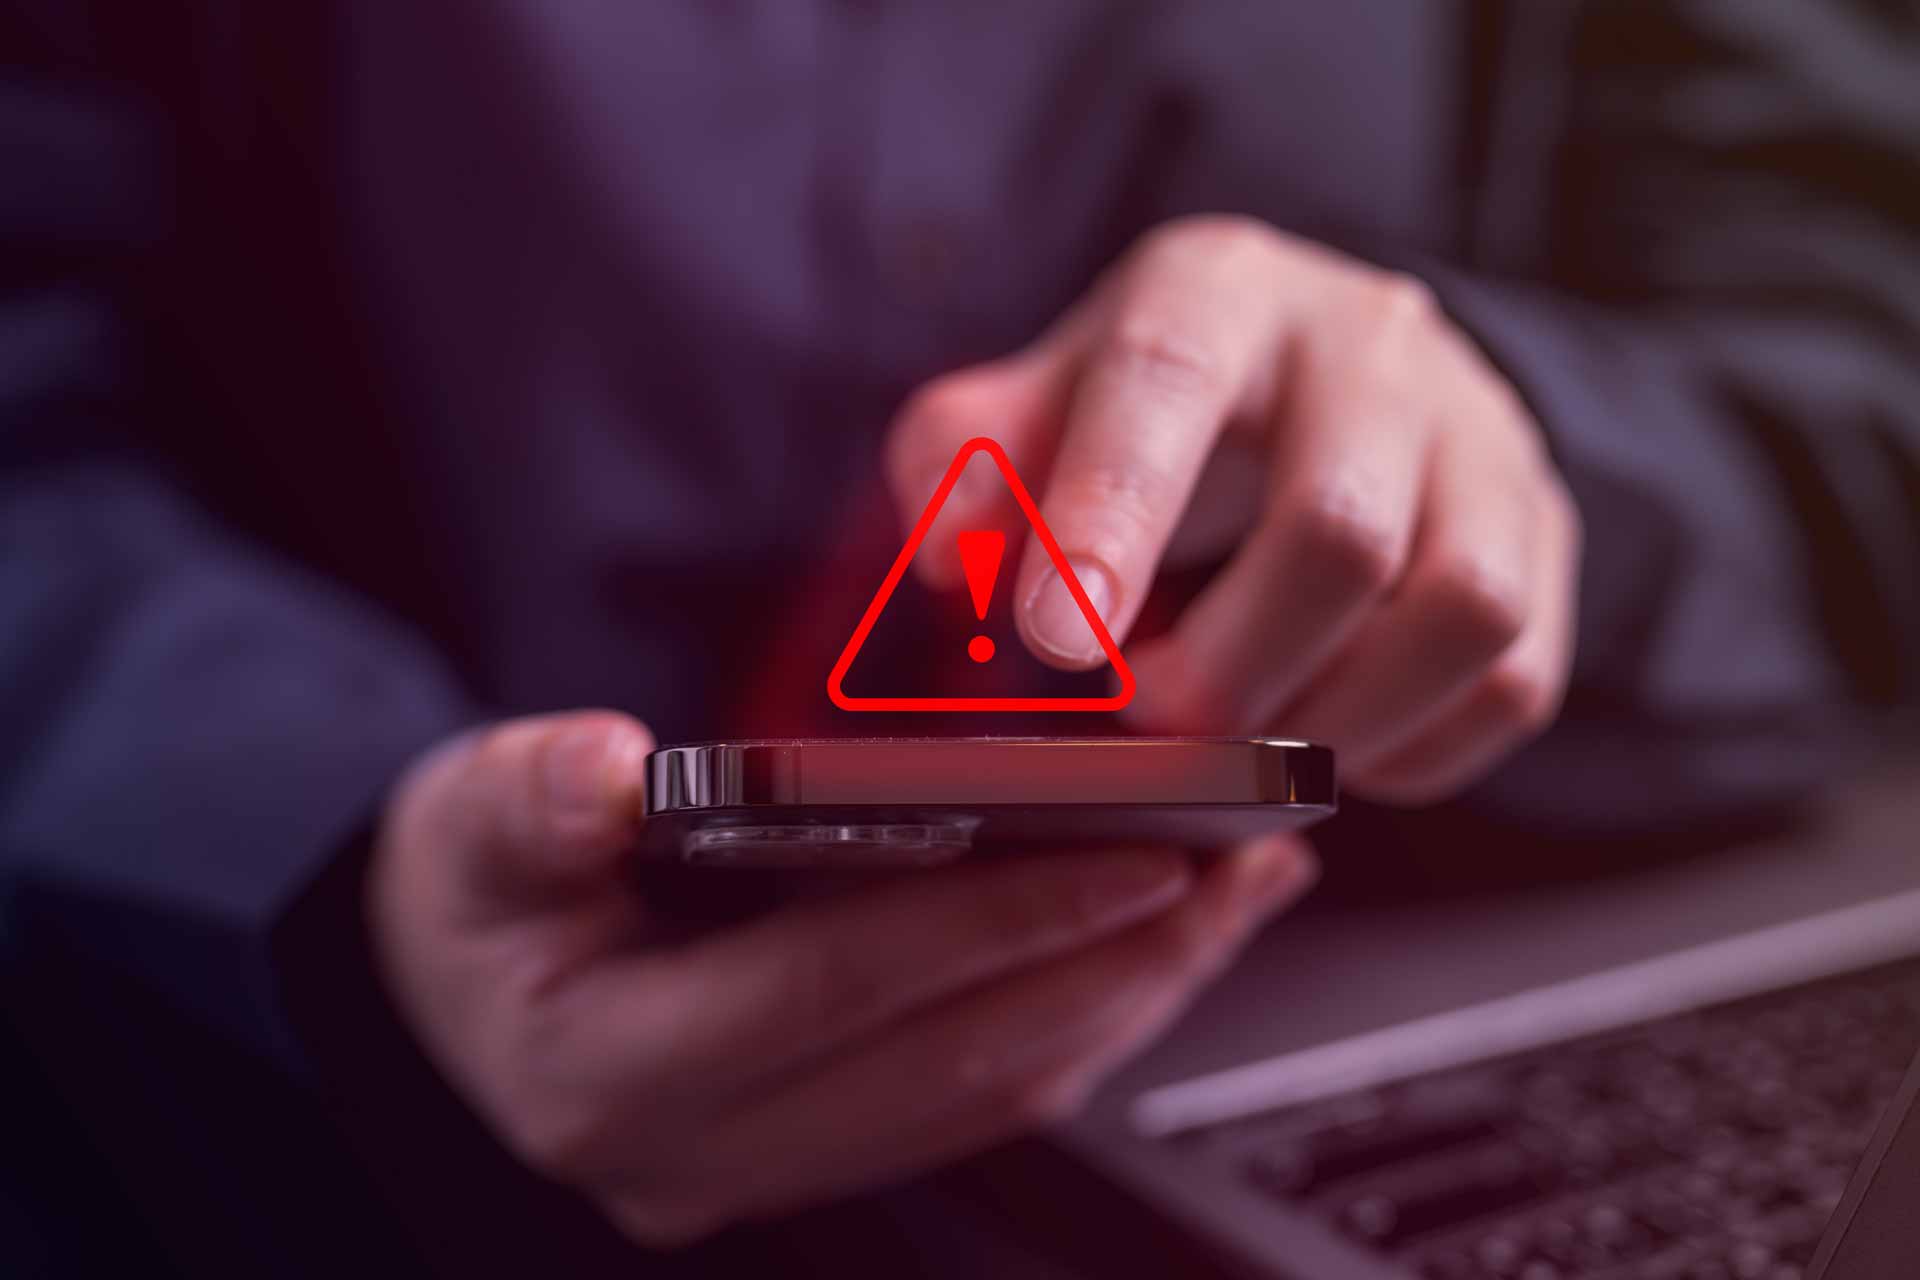 A hand hovers over a smartphone, about to accept a call. A red "alert" icon is superimposed over the photo.